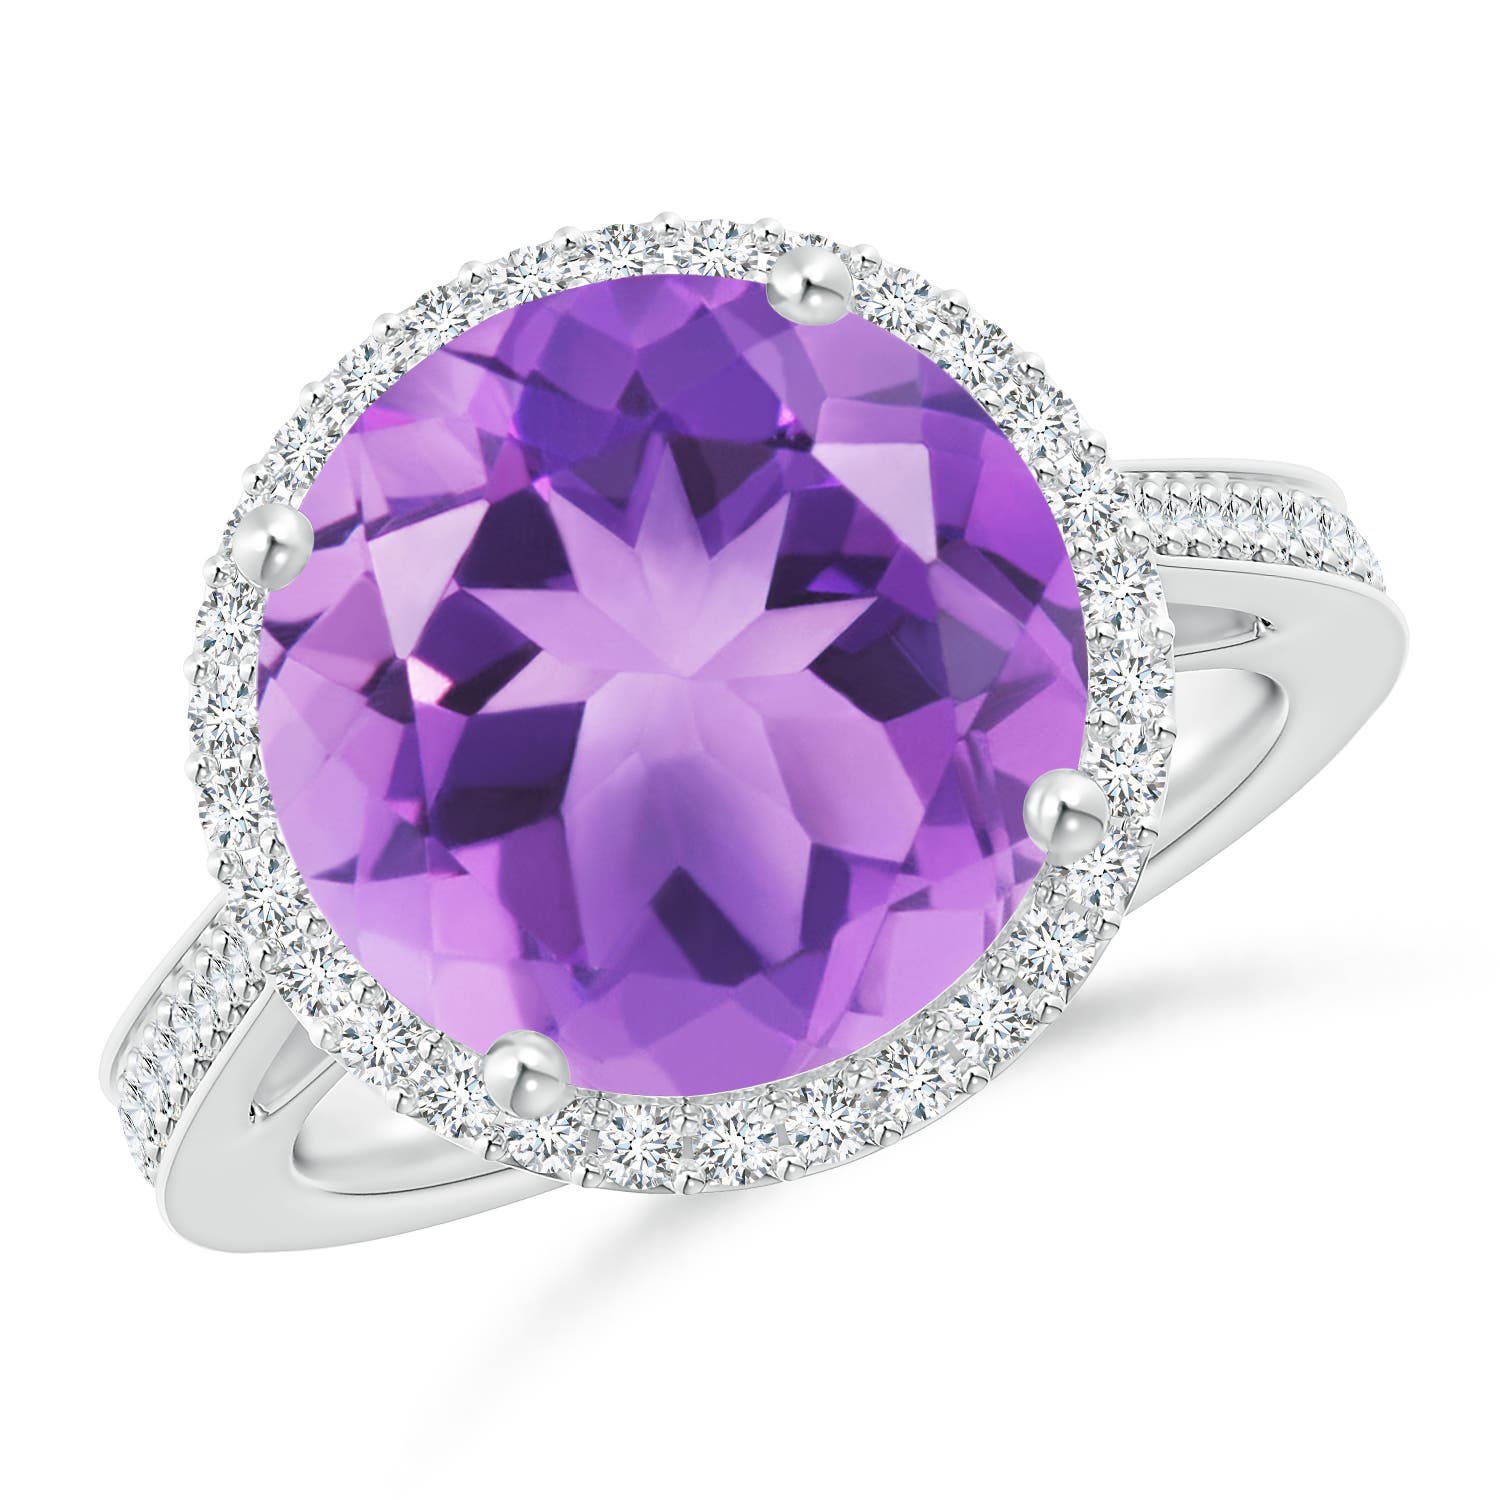 A - Amethyst / 5.94 CT / 14 KT White Gold